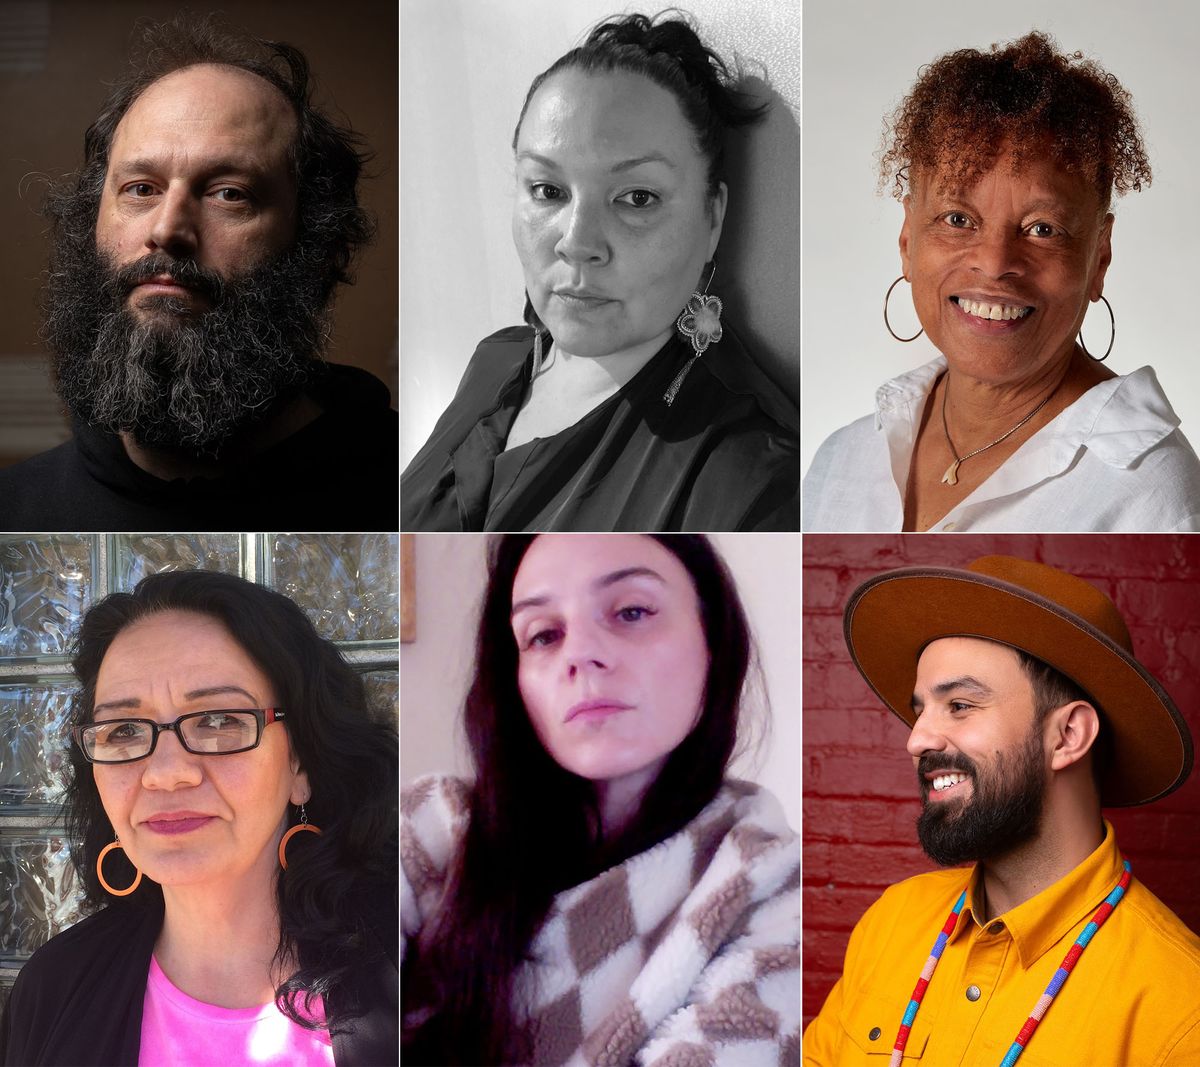 The shorlisted artists for the 2024 Sobey Art Award, top row (left to right): Mathieu Léger (Atlantic), Taqralik Partridge (Circumpolar), June Clark (Ontario); bottom row (left to right): Judy Chartrand (Pacific), Rhayne Vermette (Prairies) and Nico Williams ᐅᑌᒥᐣ (Québec). Photo credits: Léger, courtesy the artist; Partridge, courtesy the artist; Clark, photo by Dean Tomlinson; Chartrand, photo by Beth Carter; Vermette, courtesy the artist; Williams, photo by Cory Hunlin